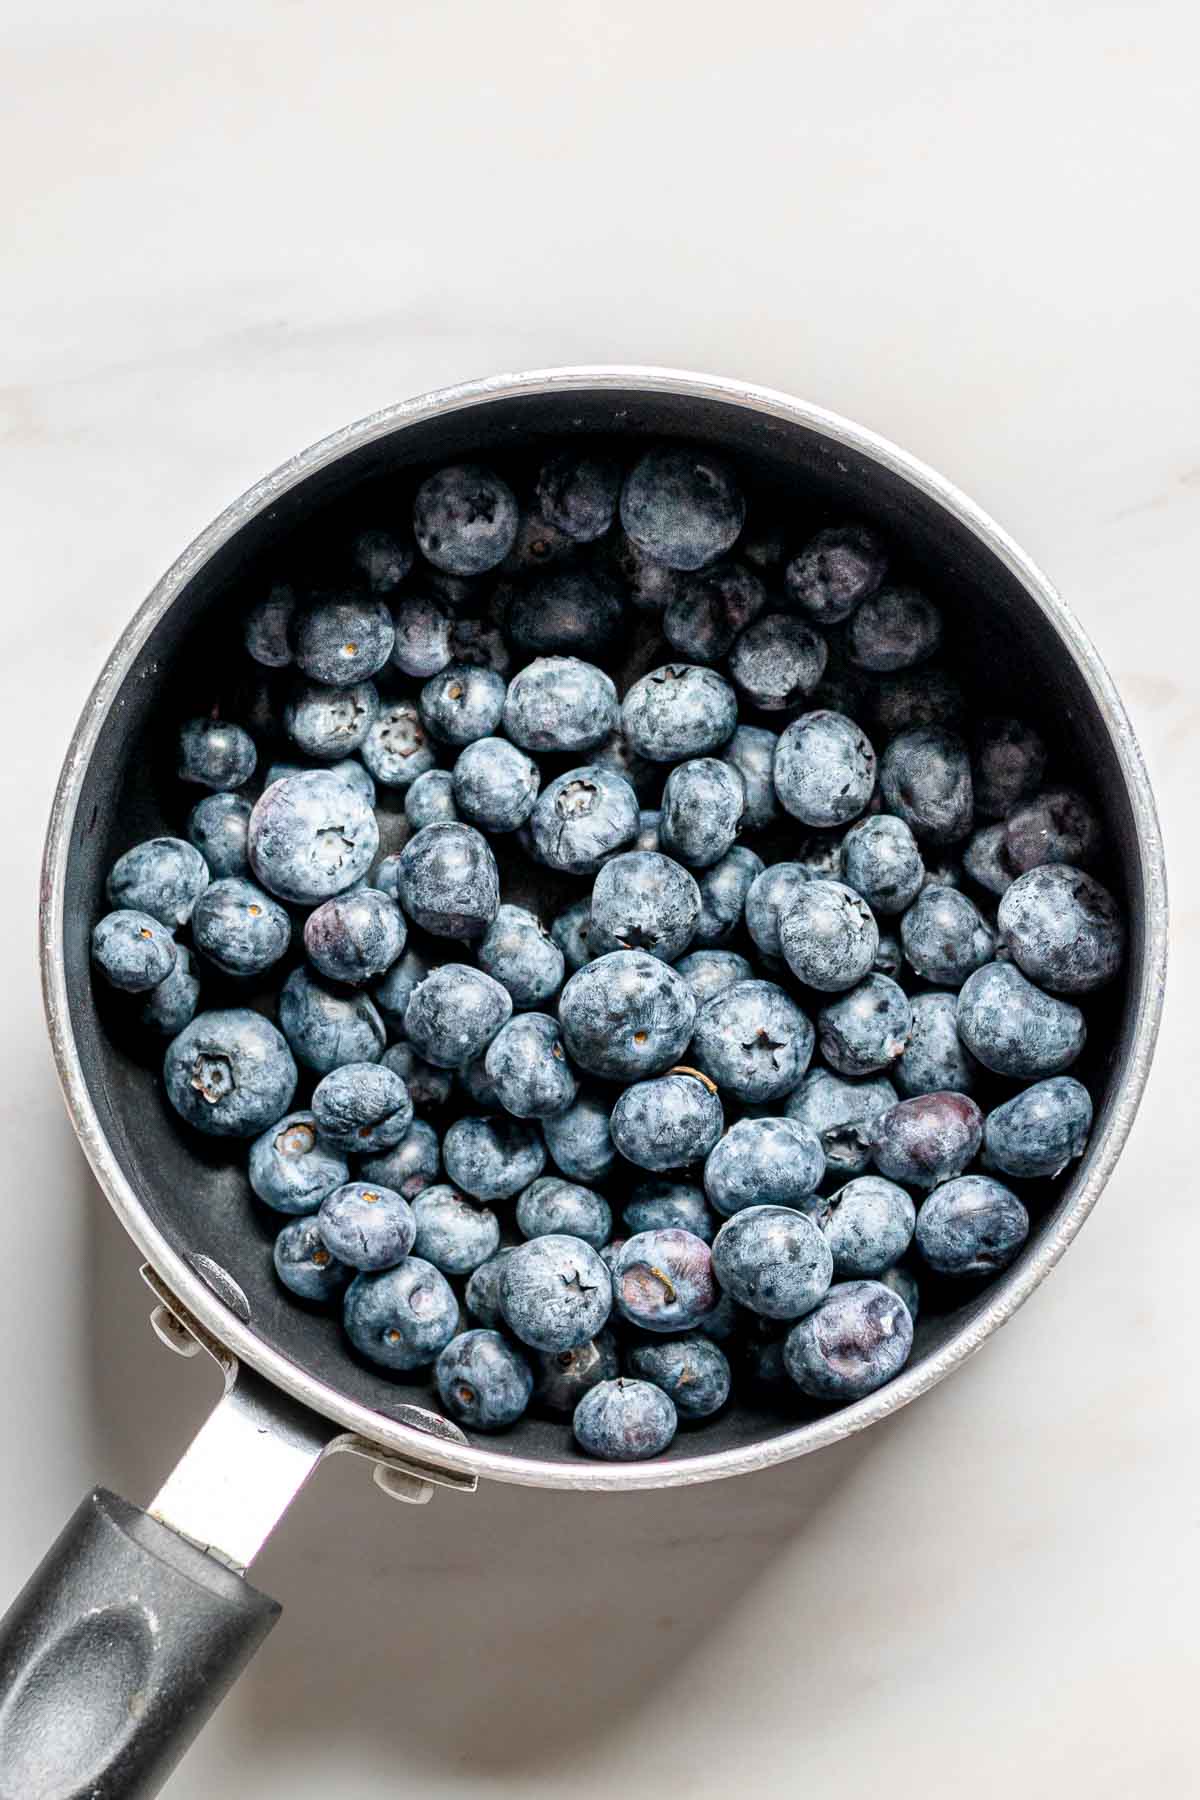 Blueberries in a small saucepan.